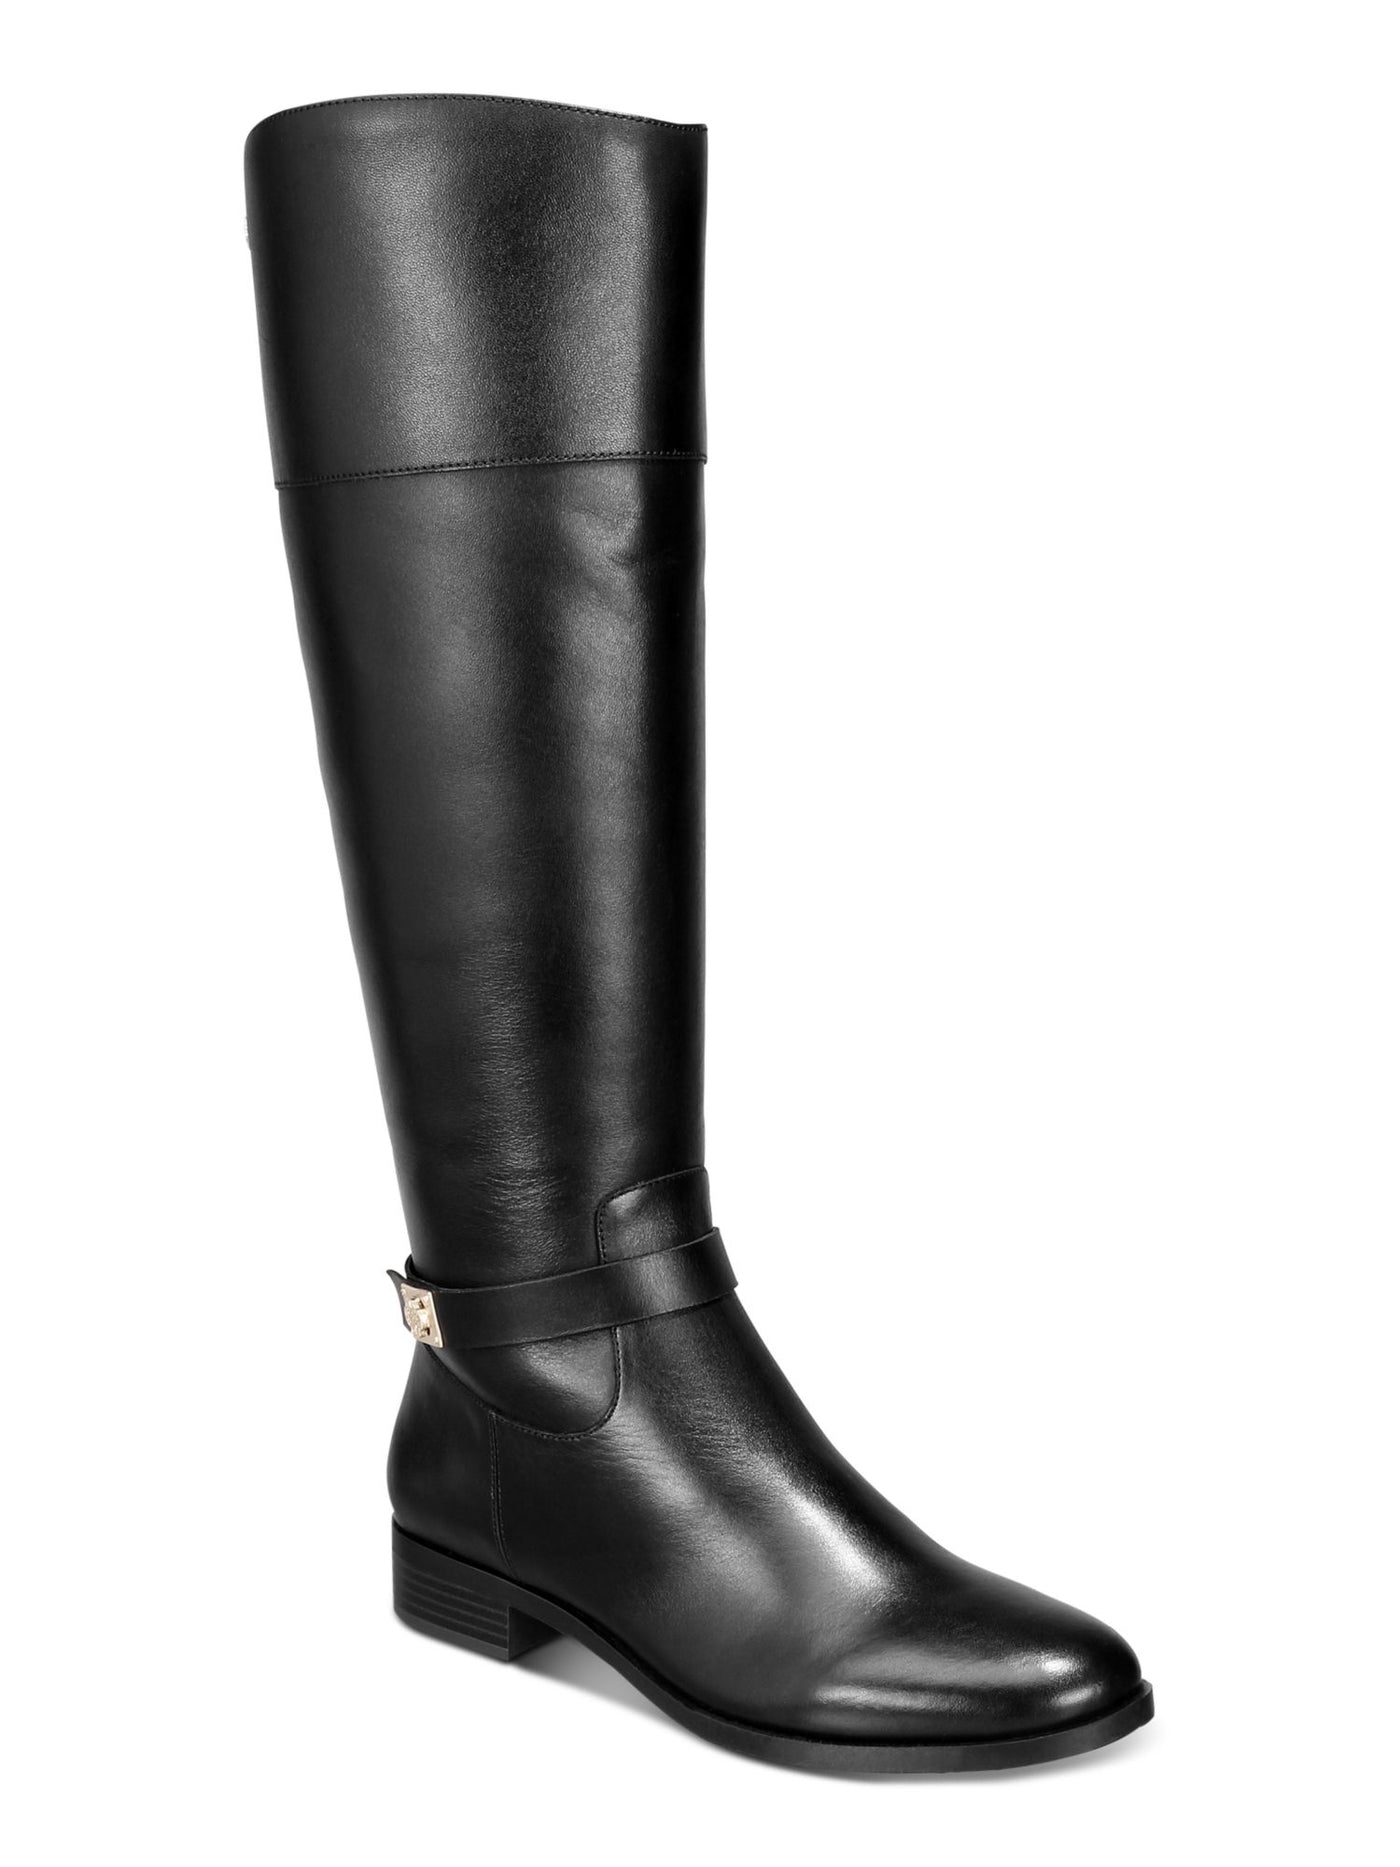 CHARTER CLUB Womens Black Buckle Accent Johannes Round Toe Zip-Up Riding Boot 6.5 M